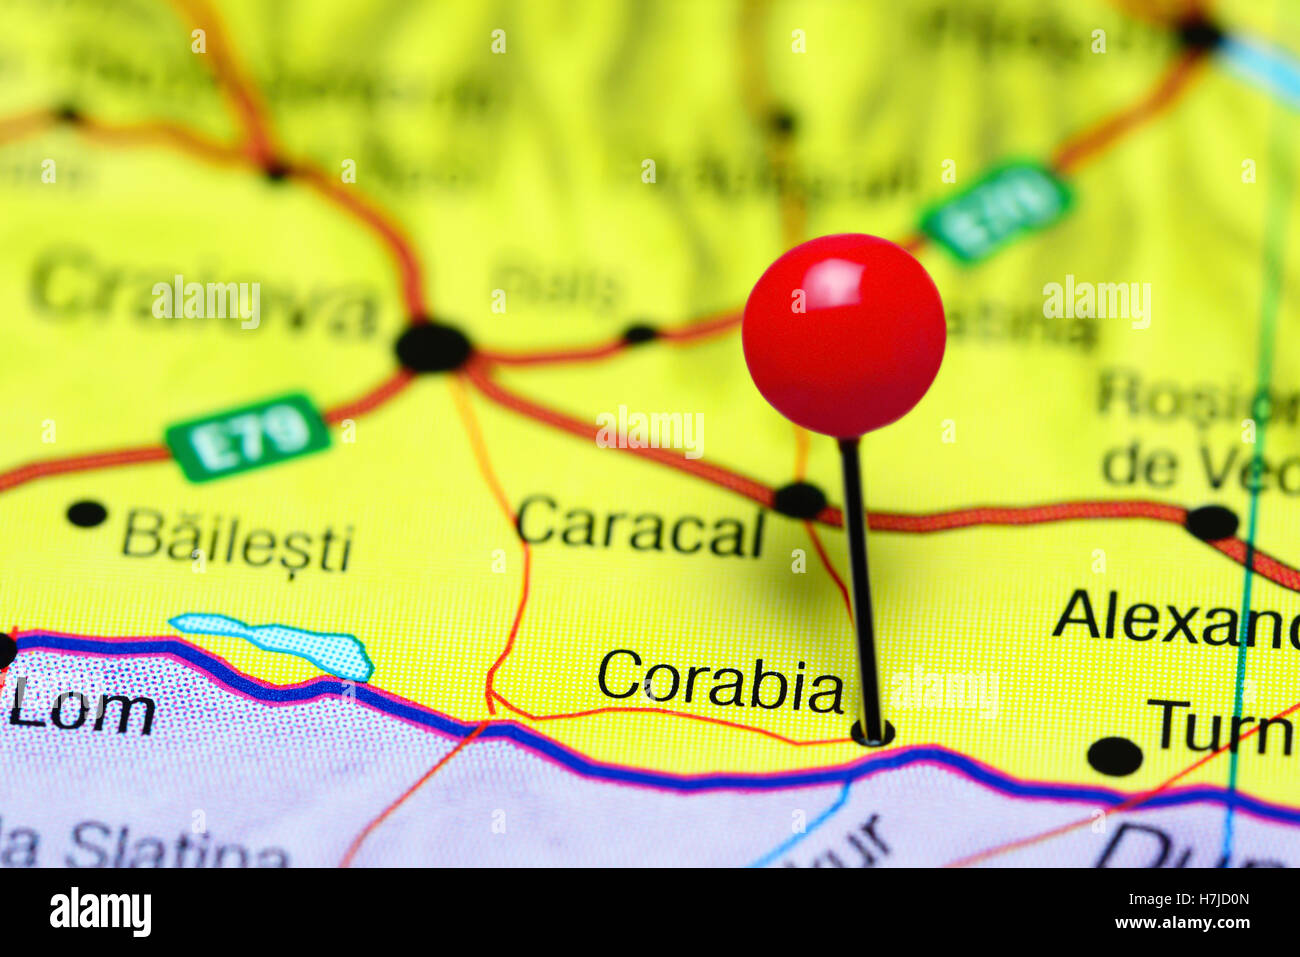 Corabia pinned on a map of Romania Stock Photo